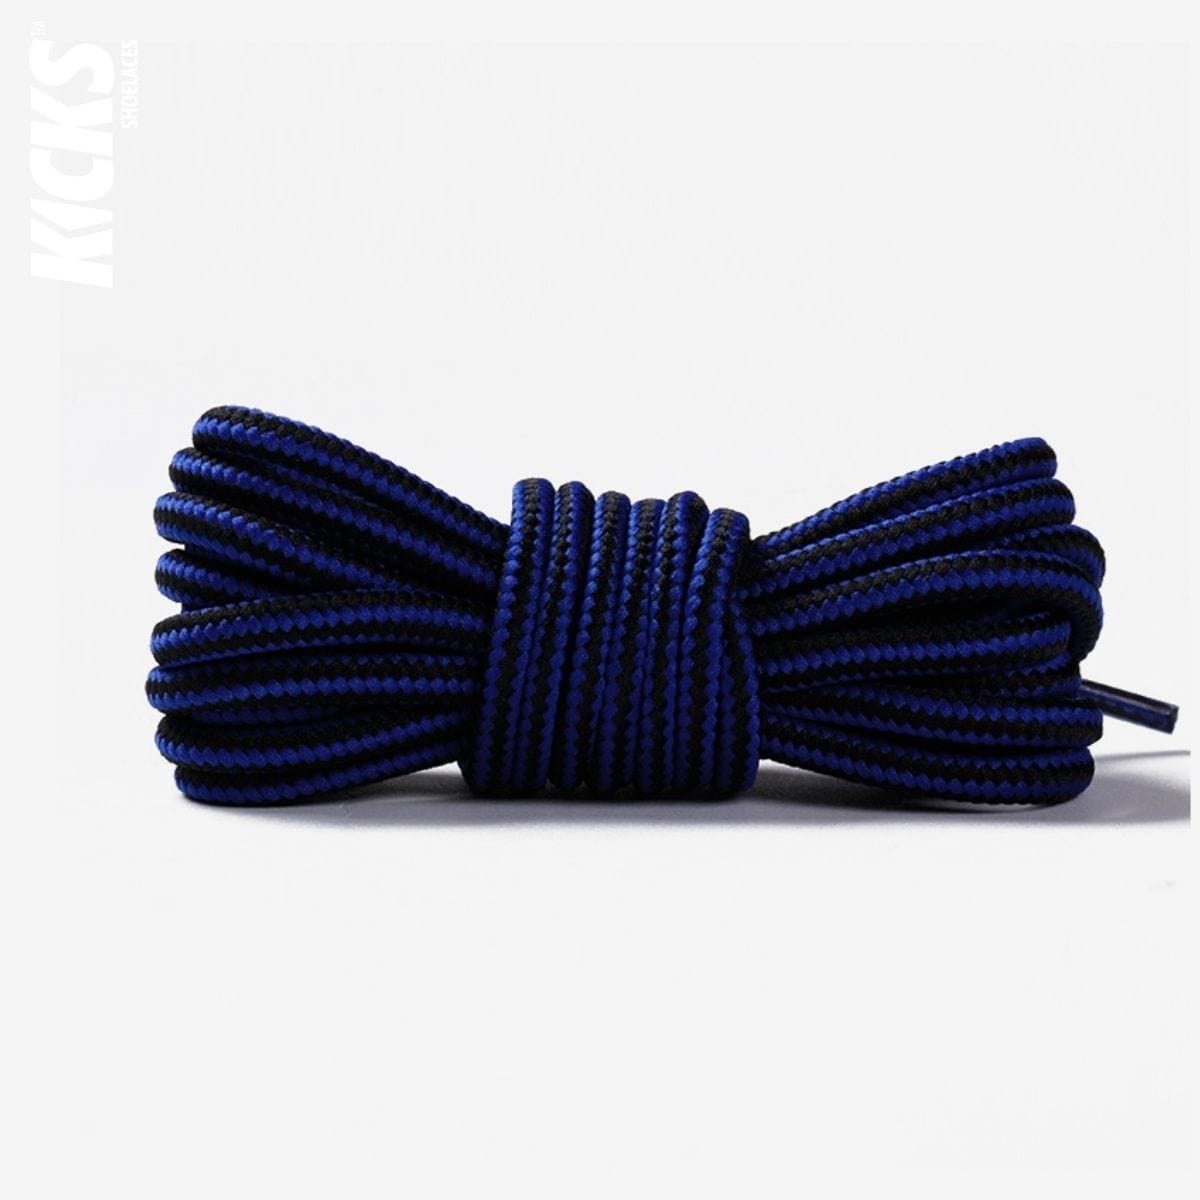 striped-two-color-shoelaces-for-casual-shoes-in-blue-and-black